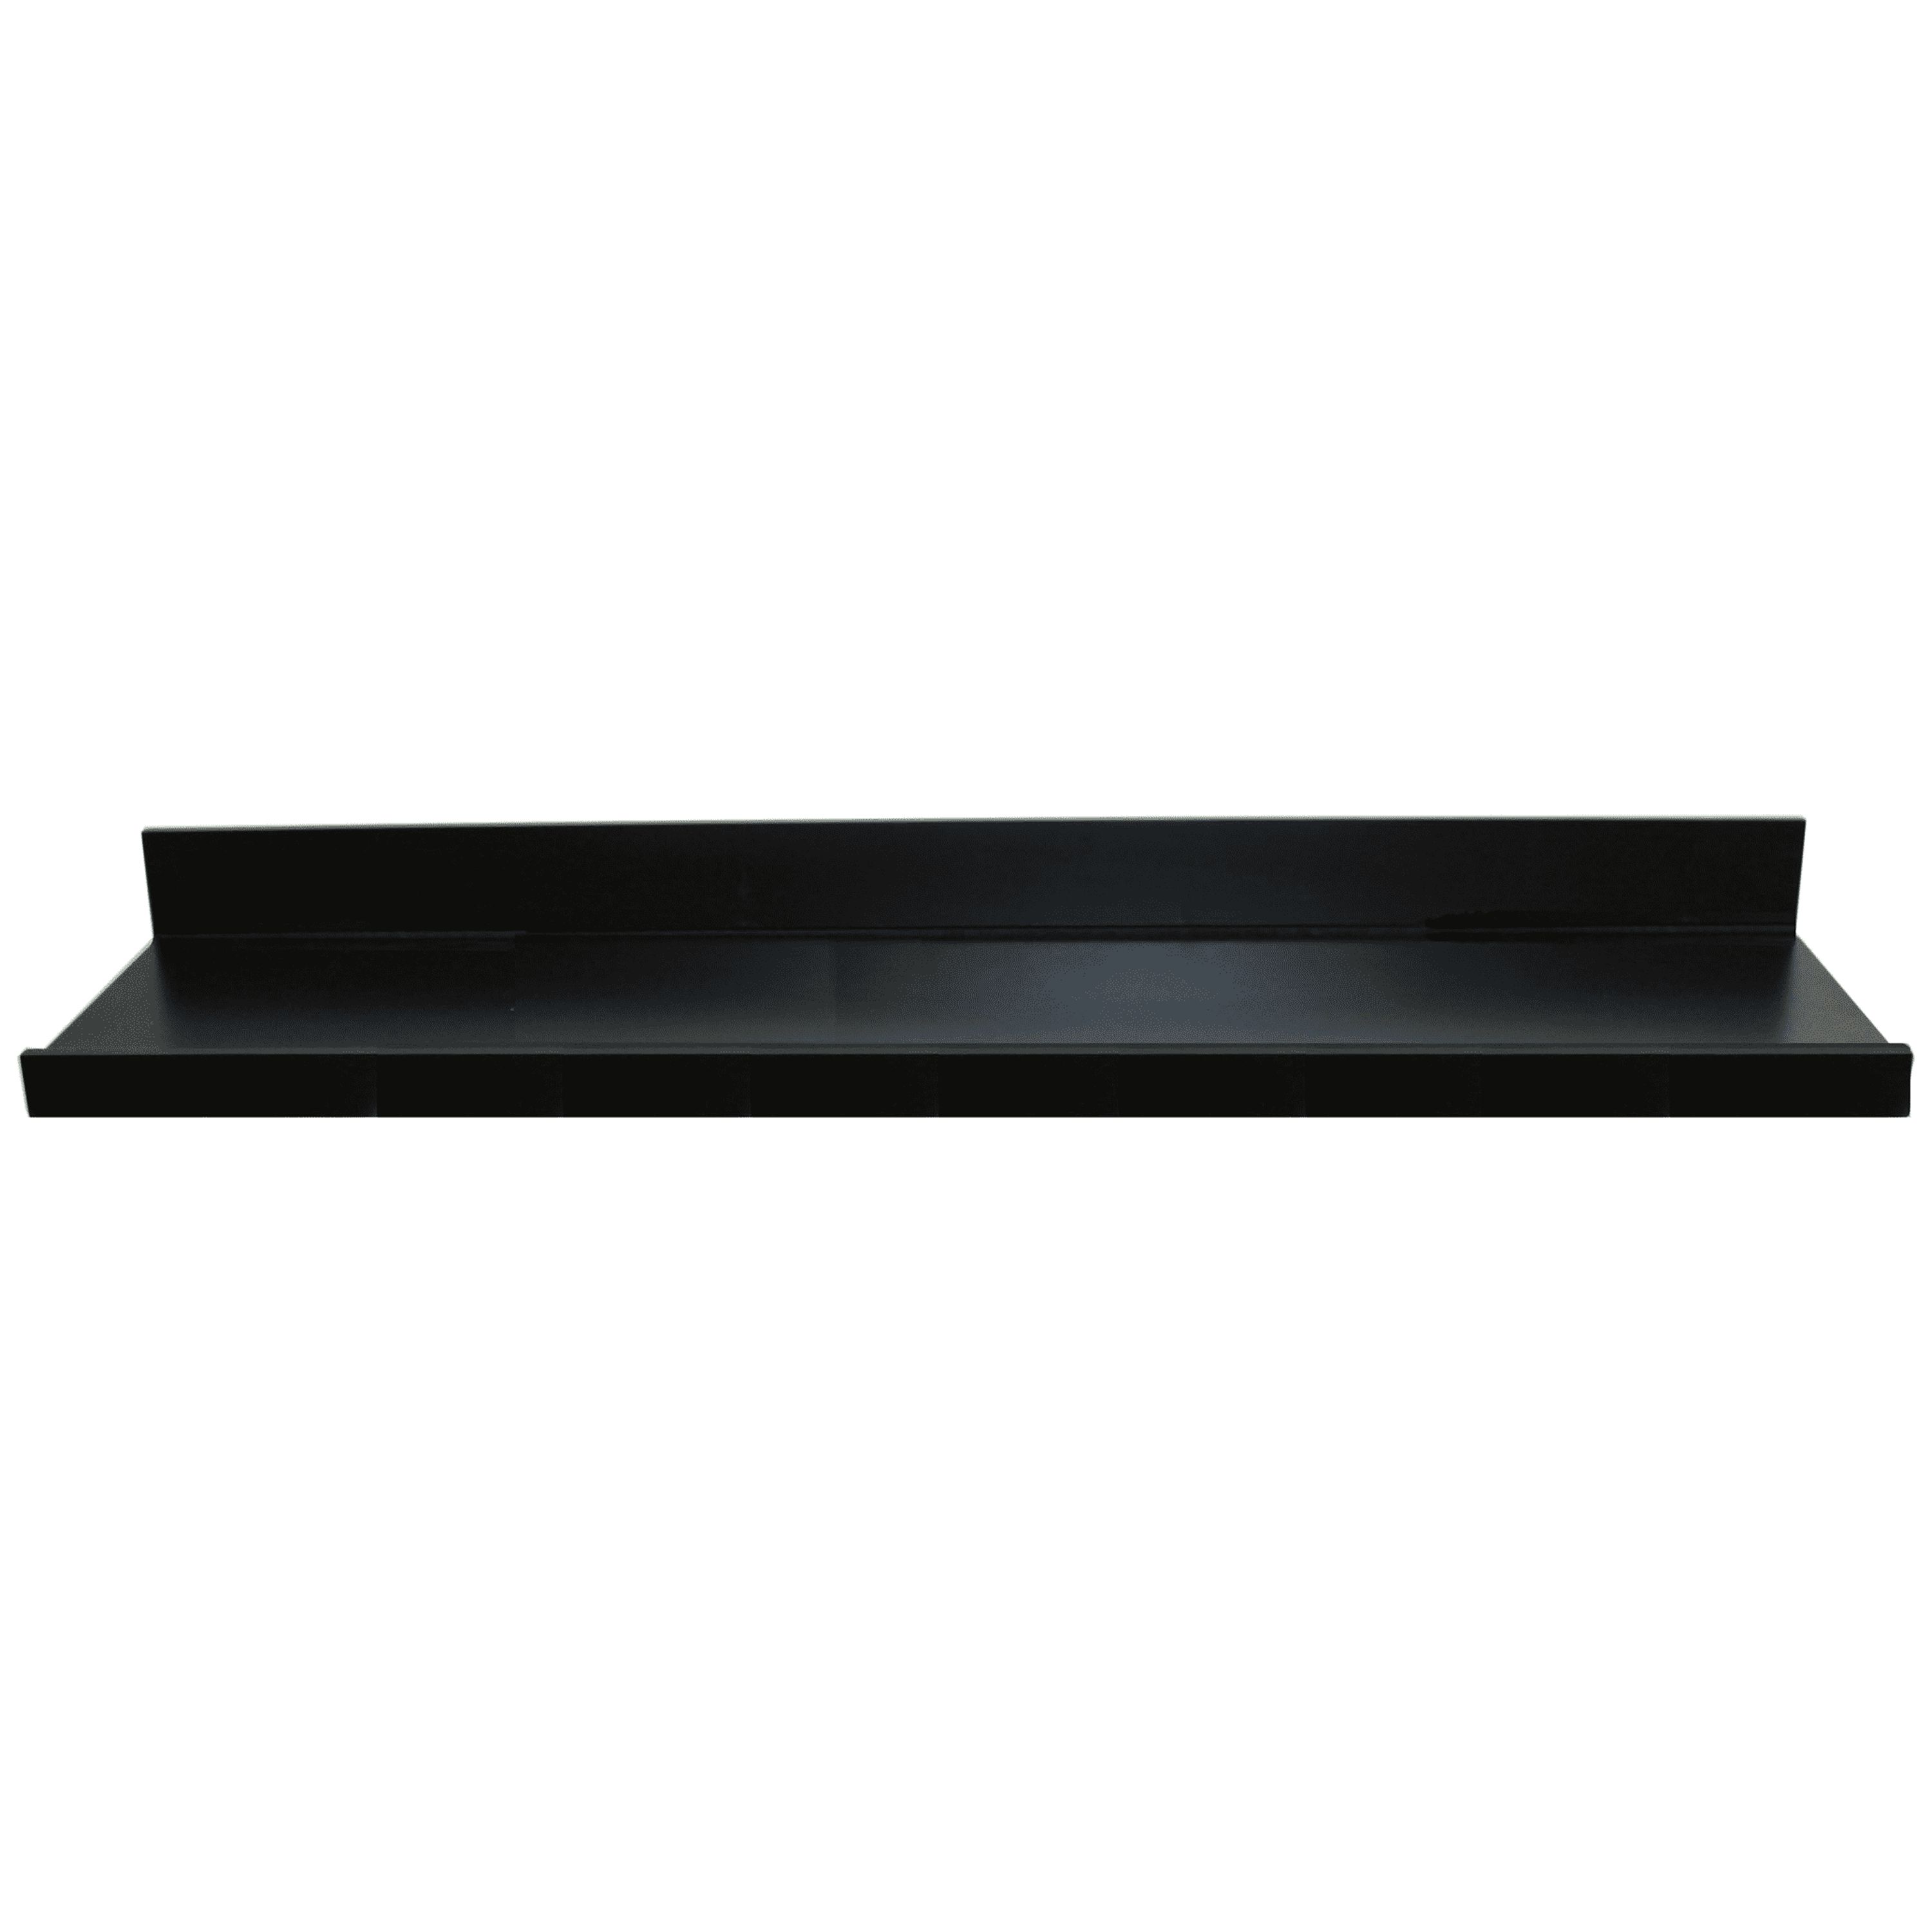 InPlace Rectangle Wood Floating Picture Ledge Wall Shelf One 23.6Wx4.5Dx3.5H Black - image 1 of 4